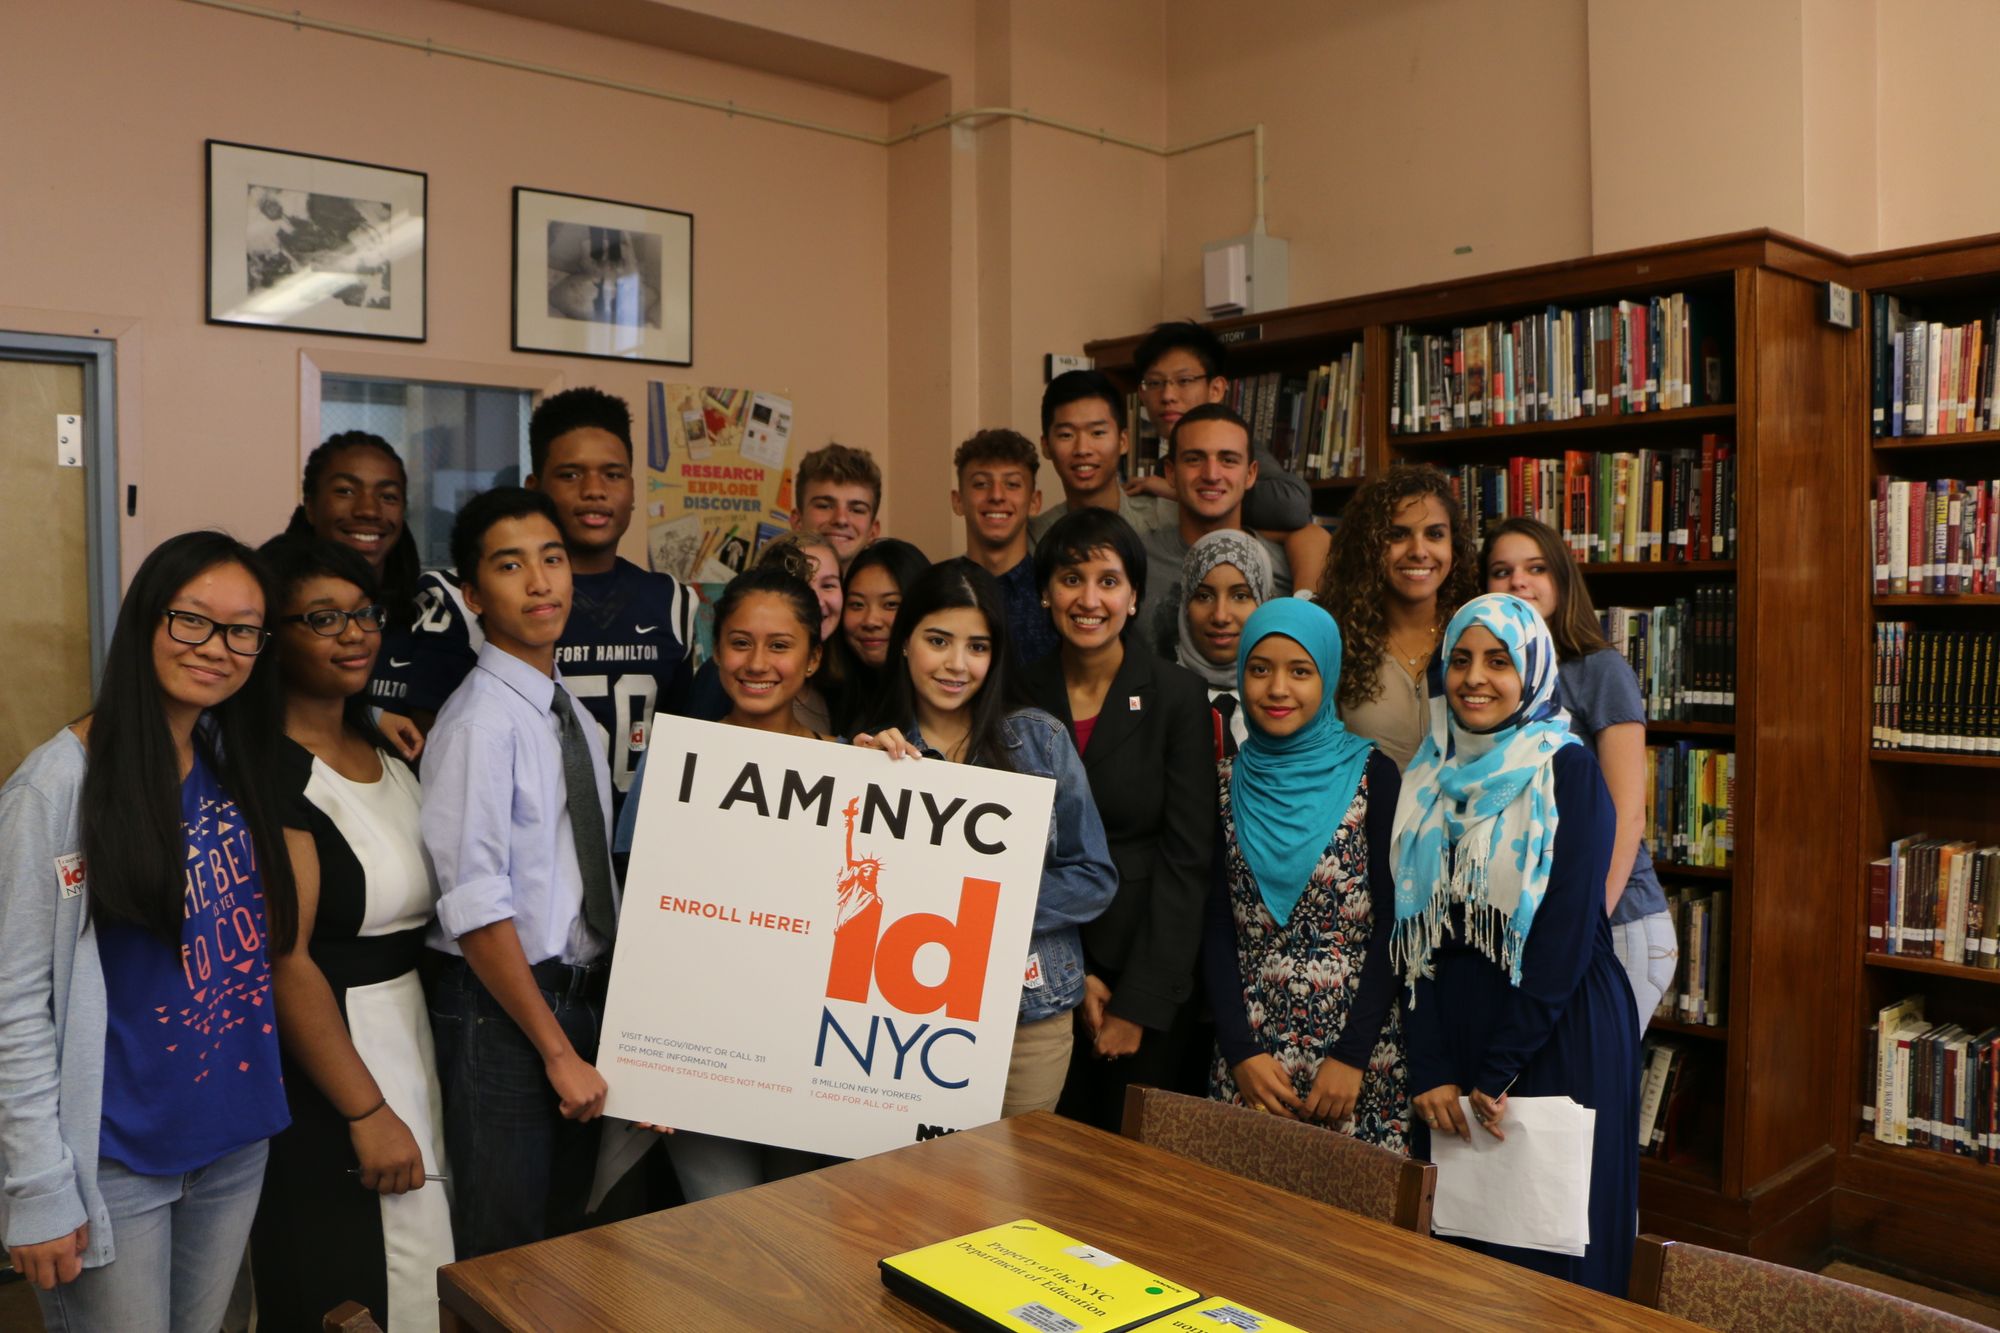 IDNYC Comes To Fort Hamilton High School With Pop-Up Enrollment Center